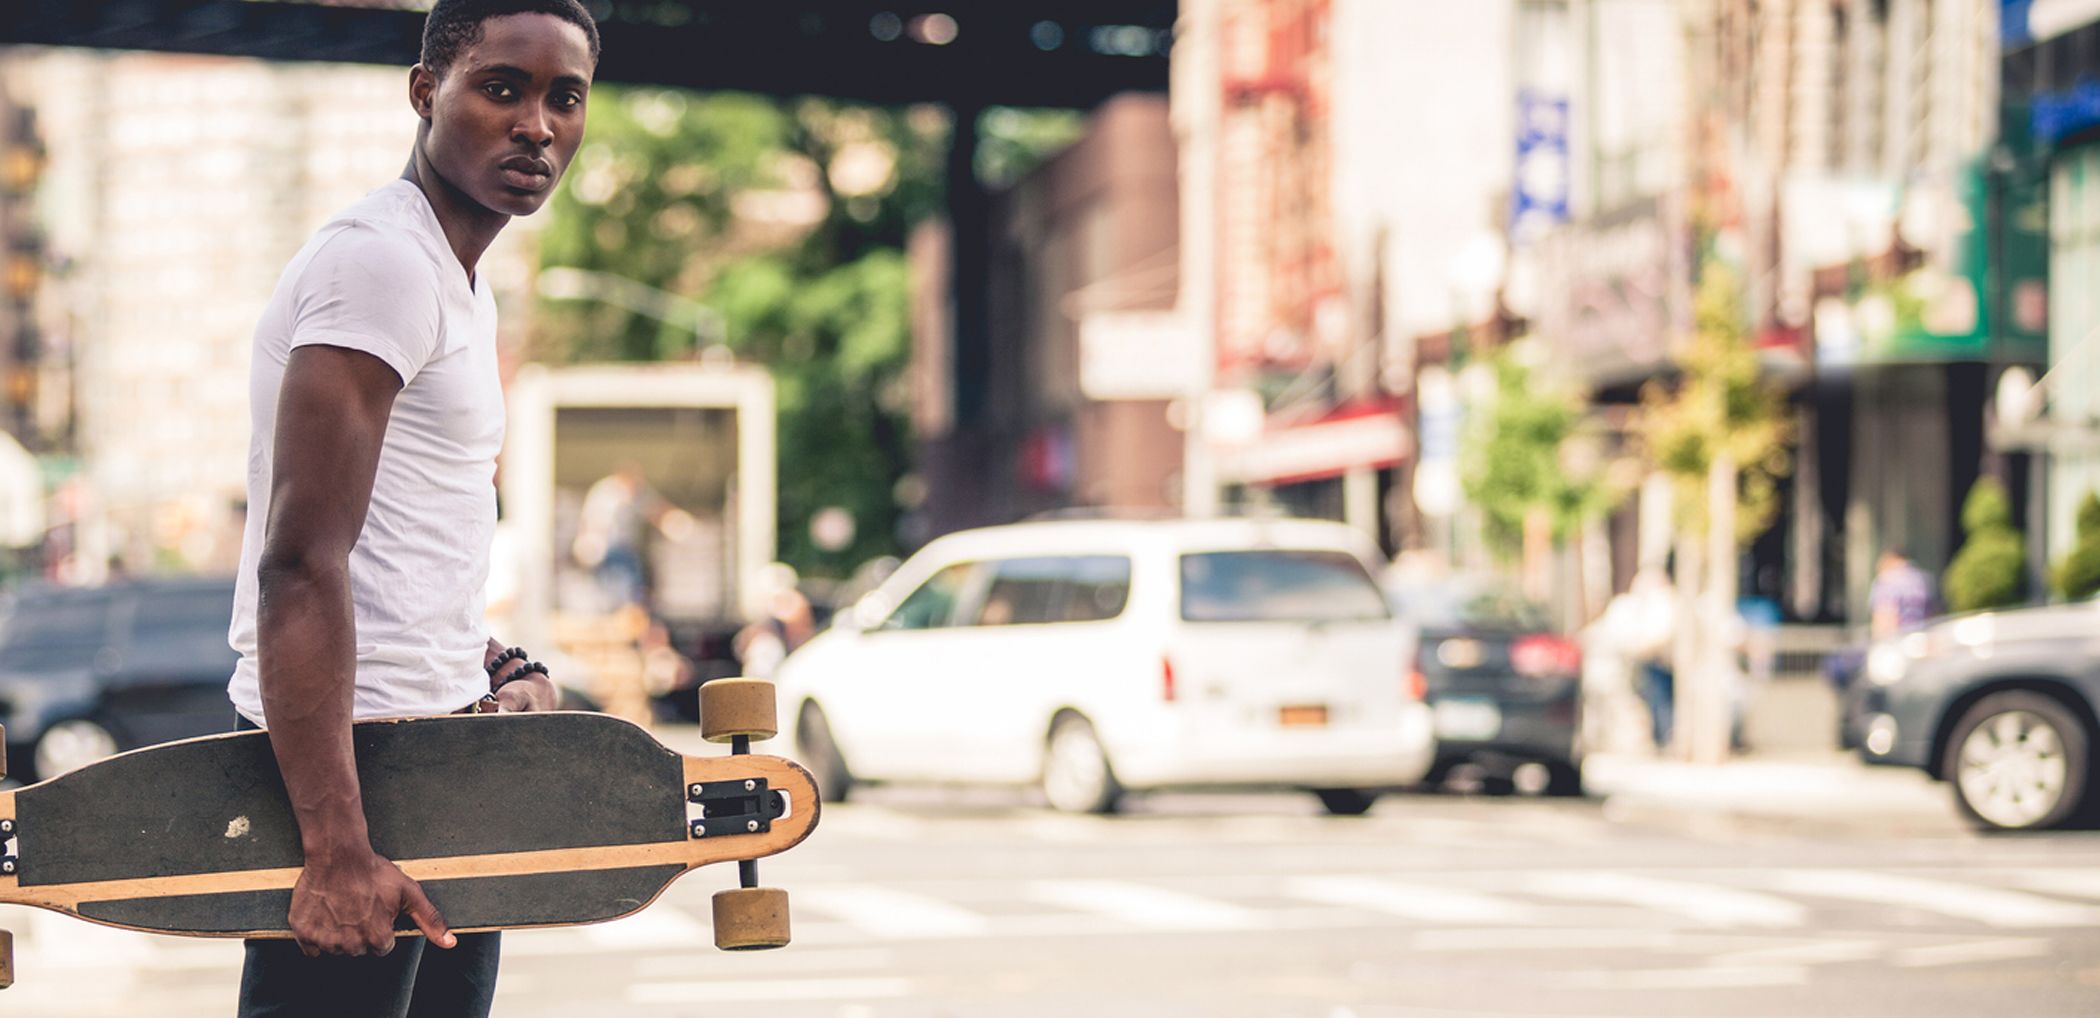 A teenager holds on to a skateboard as he crosses the street.